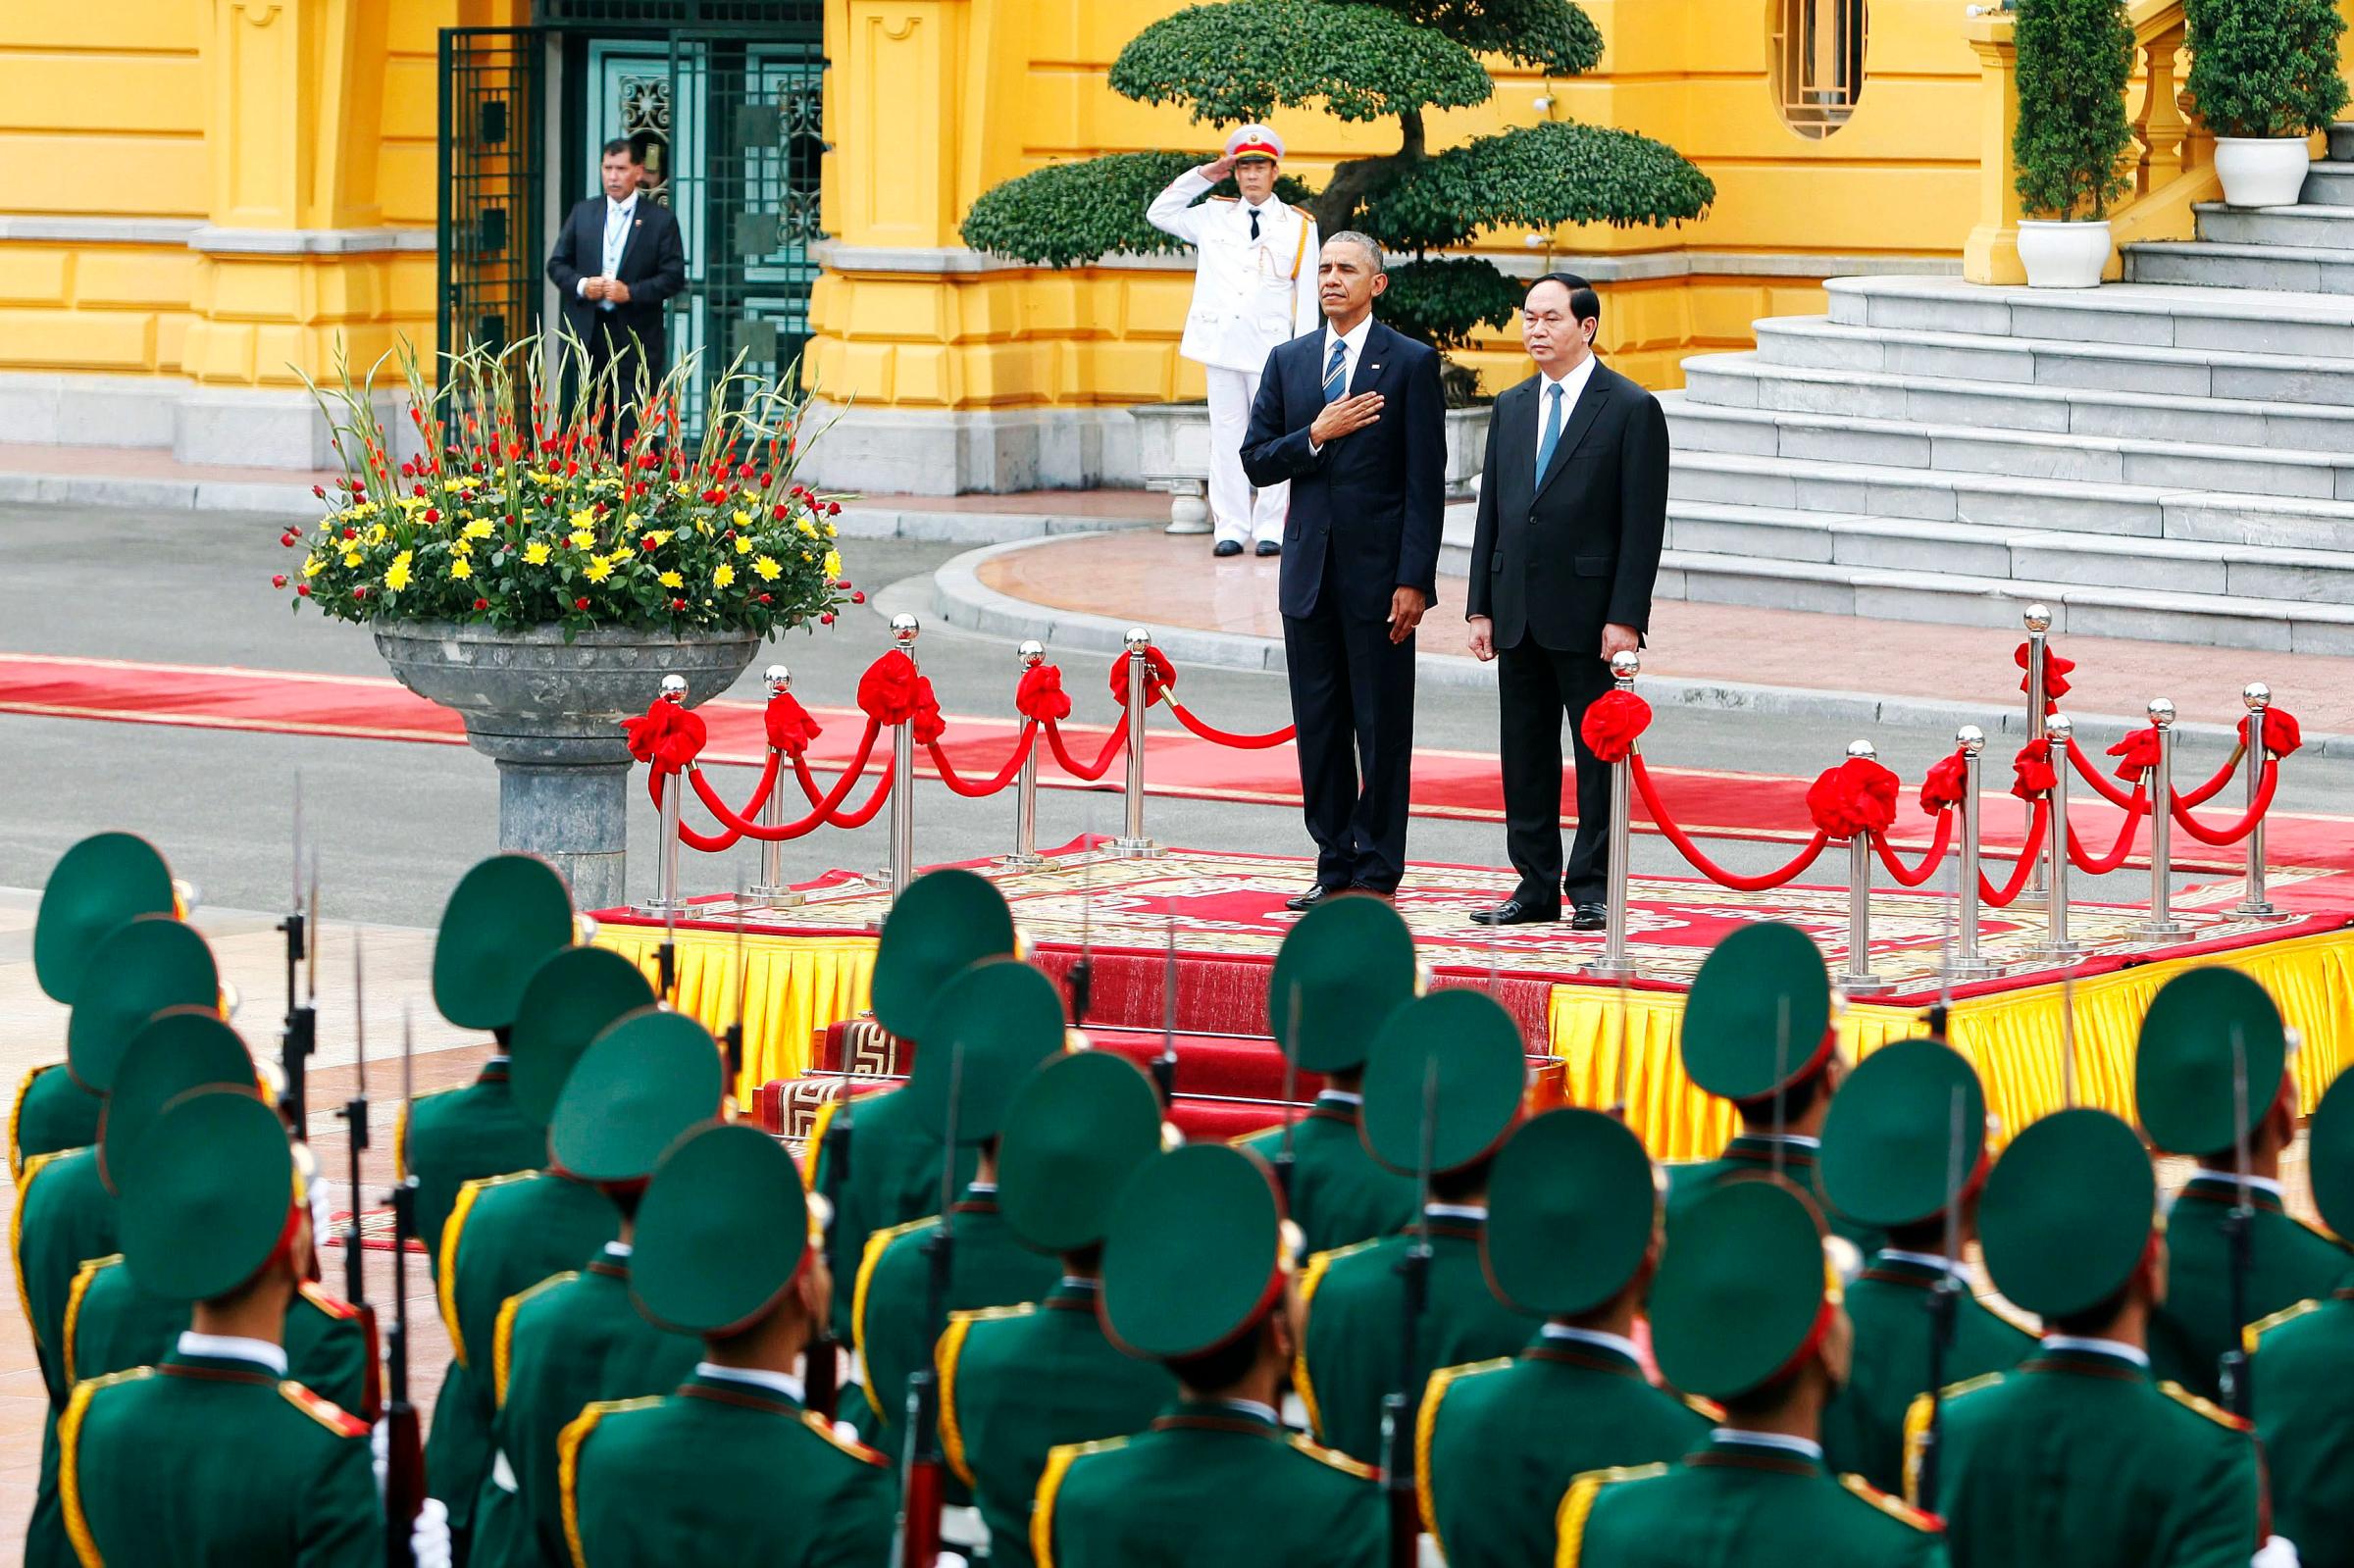 U.S. President Barack Obama and Vietnam's President Tran Dai Quang review an honor guard at the Presidential Palace in Hanoi, Vietnam on May 23, 2016.